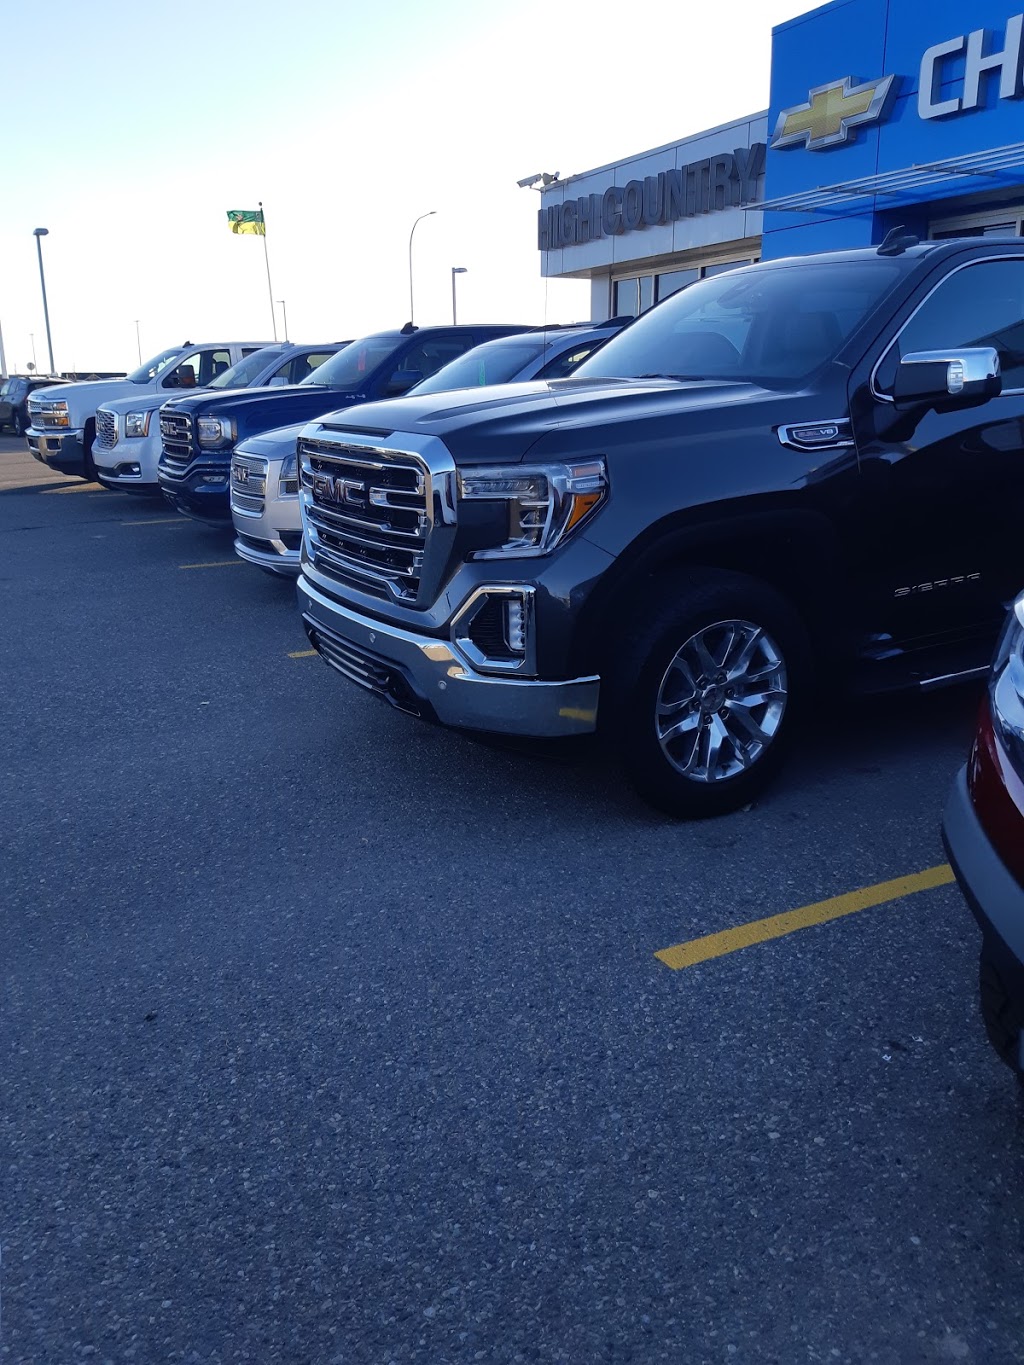 High Country Chevrolet Buick GMC Ltd | 702 11 Ave SE, High River, AB T1V 1P2, Canada | Phone: (866) 992-2847